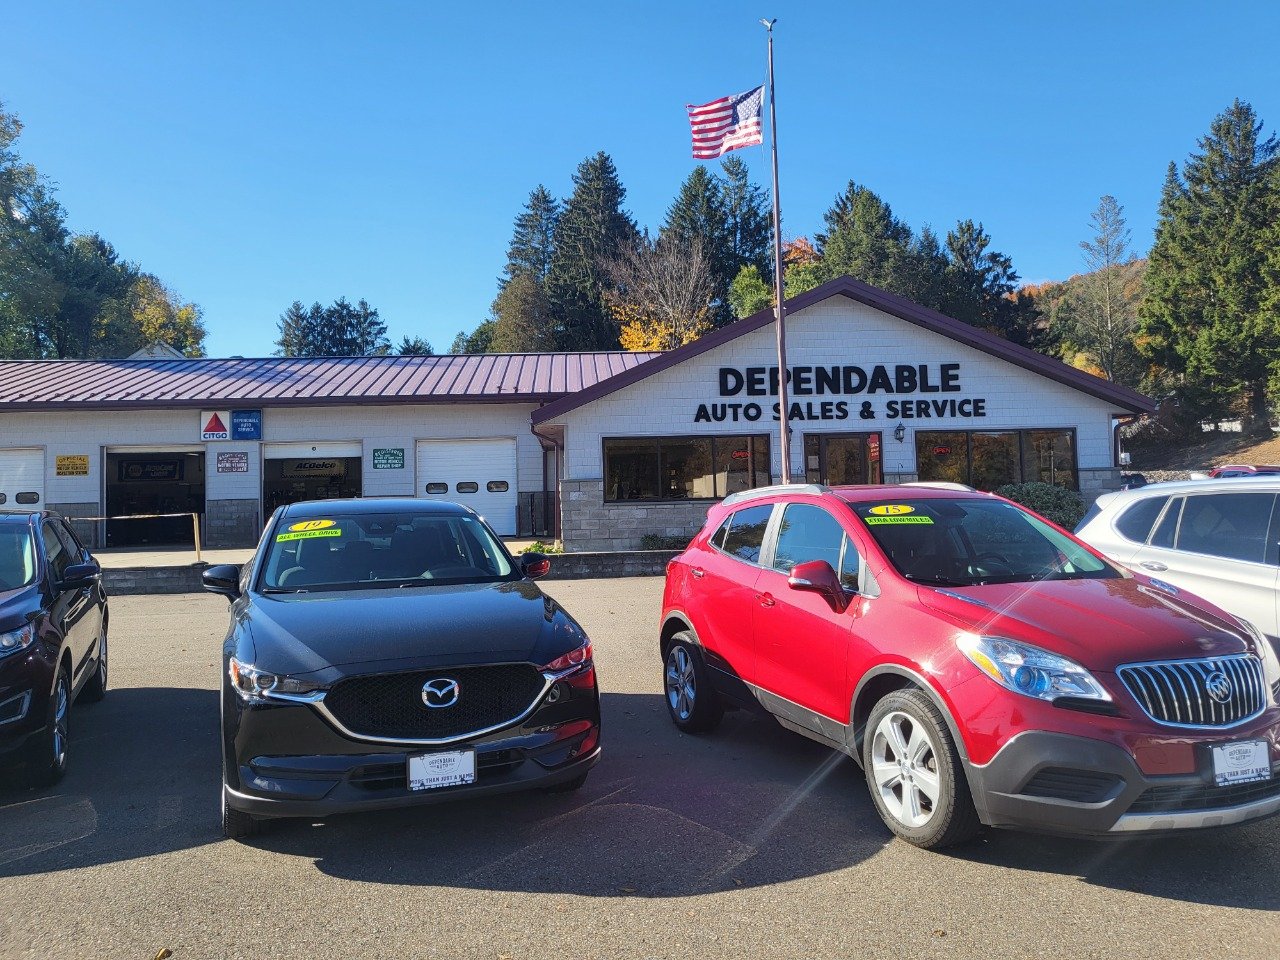 Dependable Auto Sales and Service